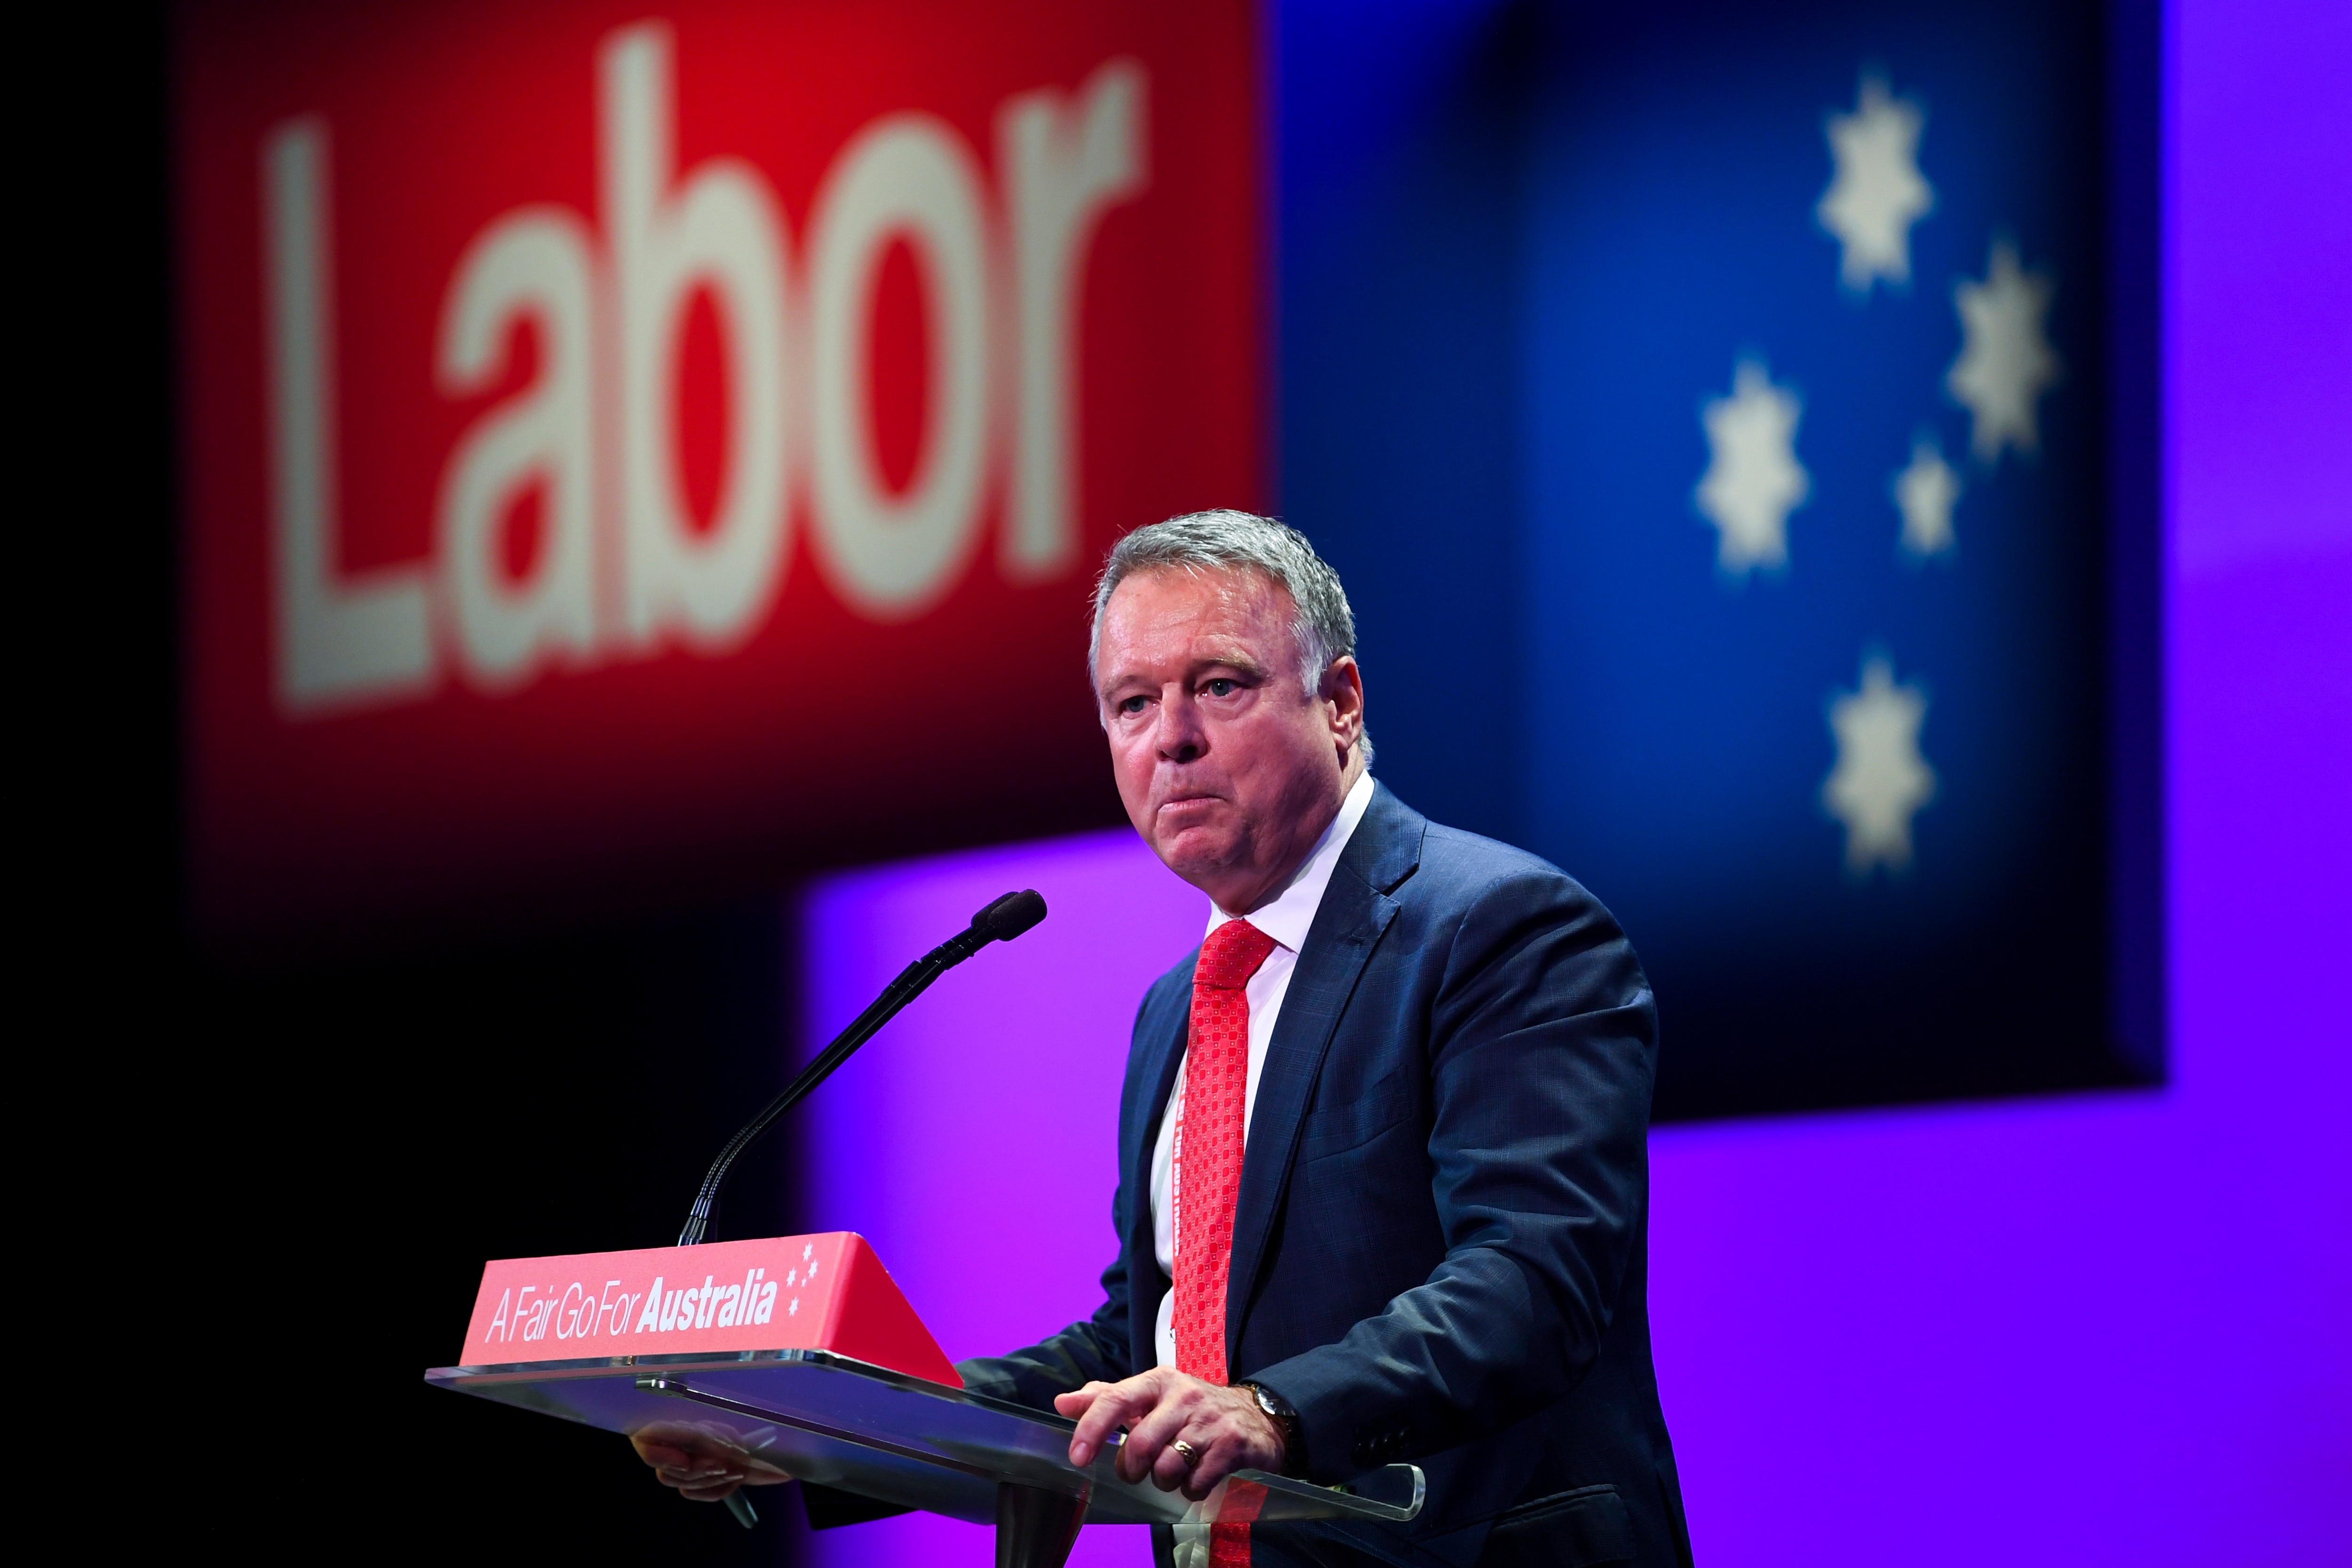 Labor MP Joel Fitzgibbon says the party has drifted too far to the left.